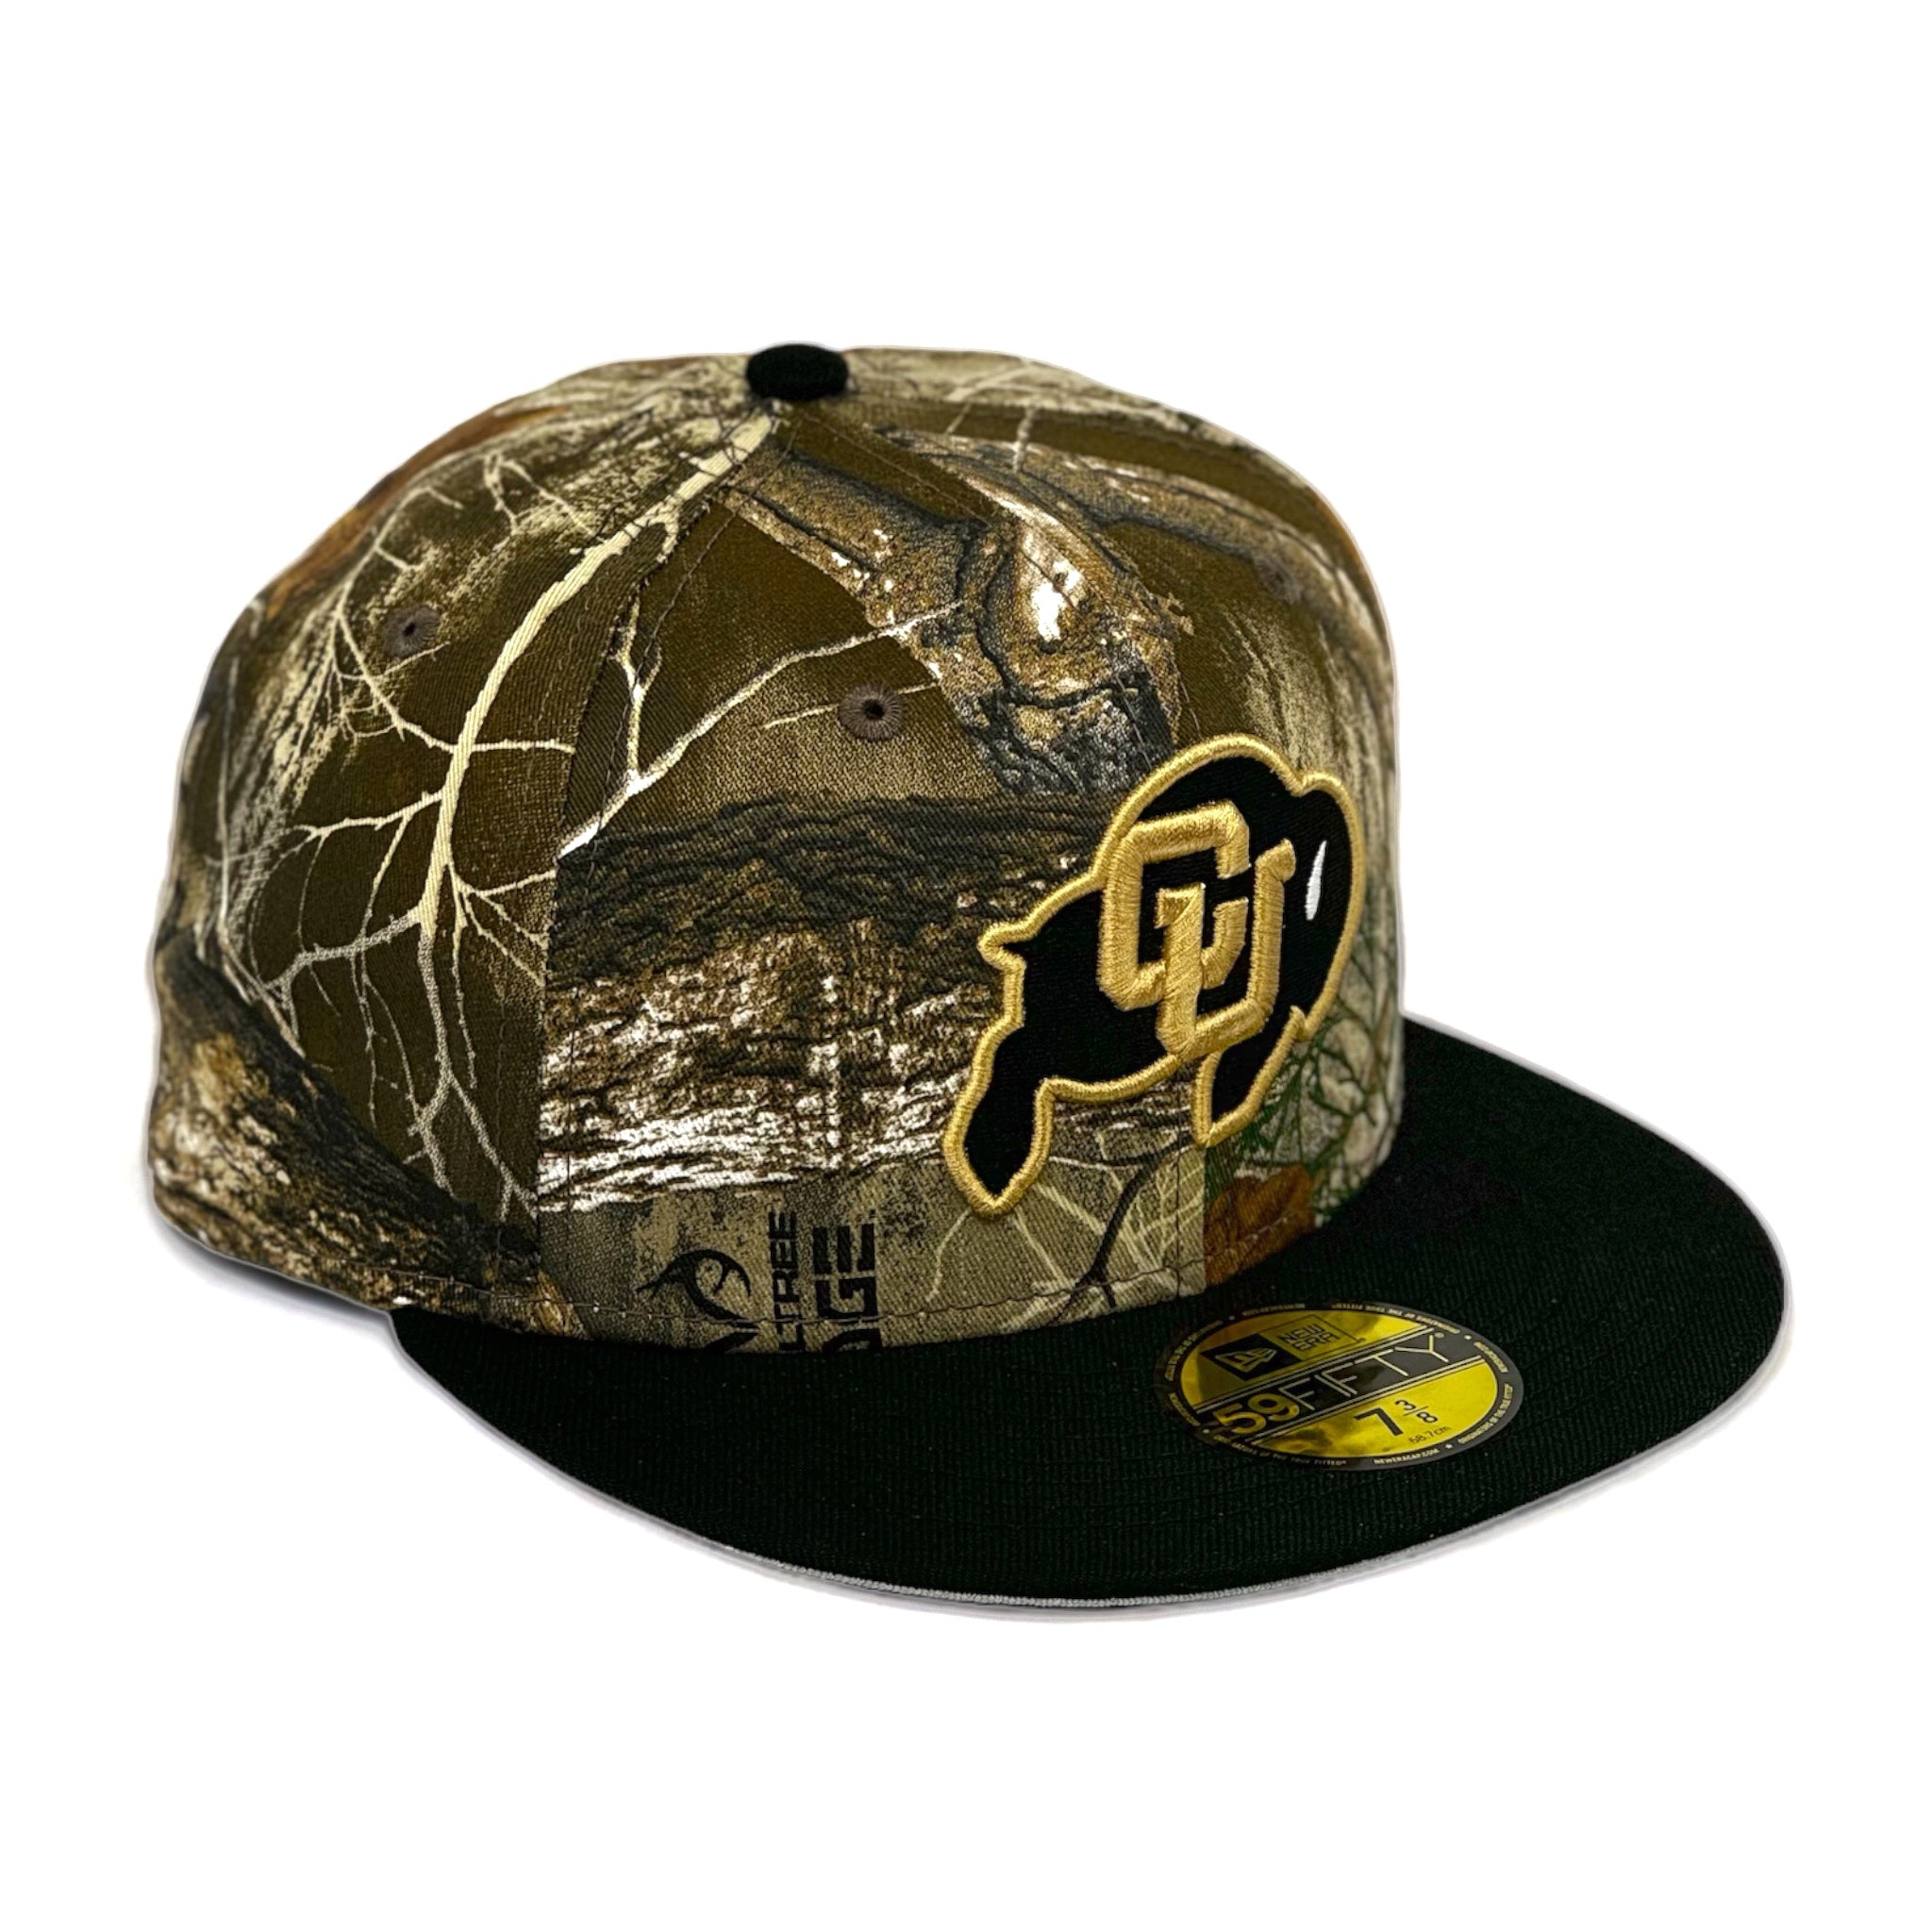 COLORADO BUFFALOES (REAL-TREE) NEW ERA 59FIFTY FITTED